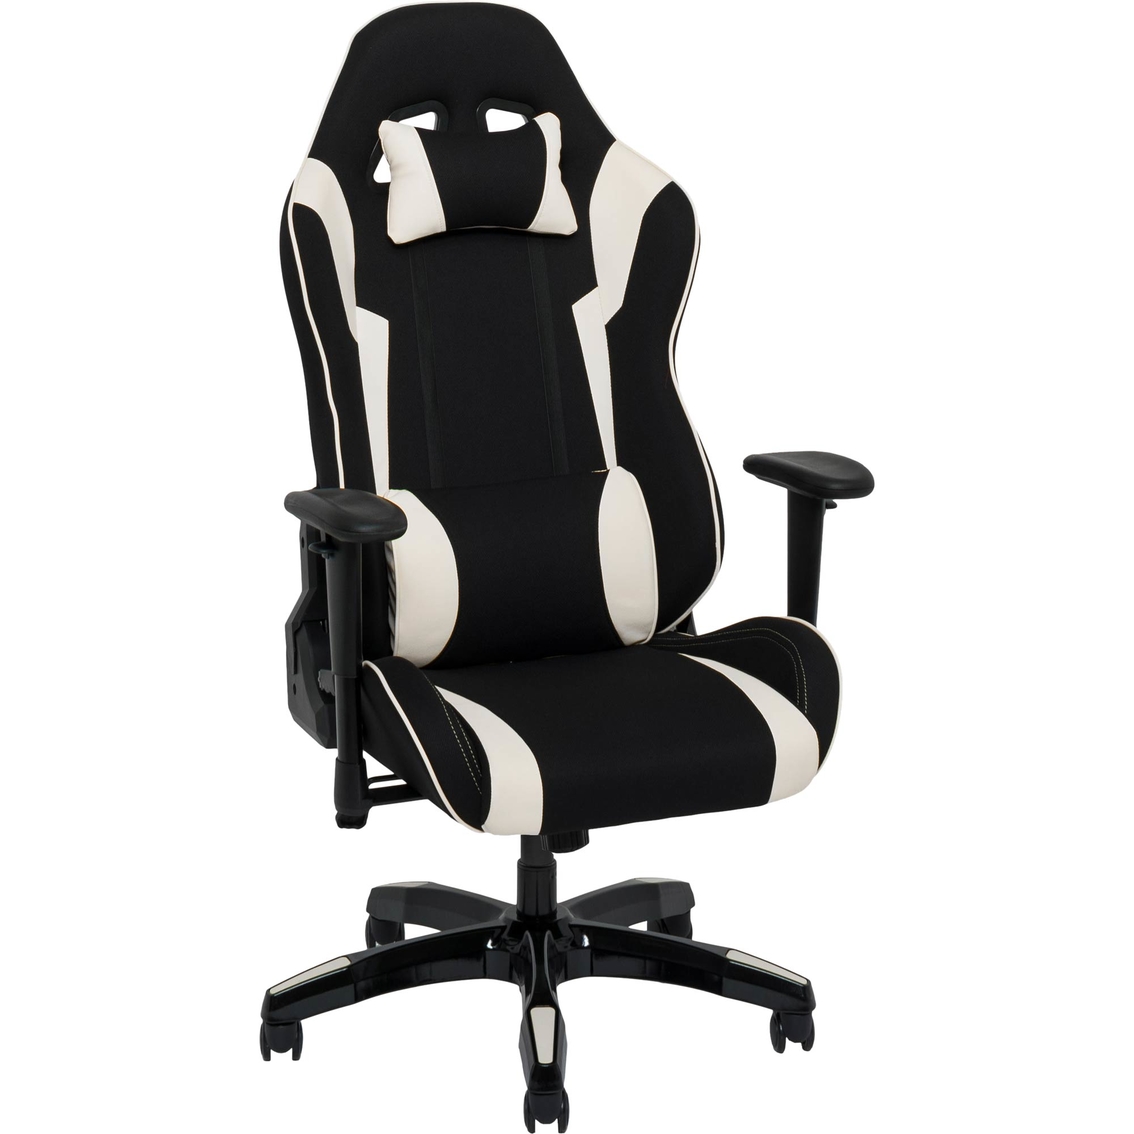 CorLiving High Back Ergonomic Gaming Chair with Height Adjustable Arms - Image 1 of 4